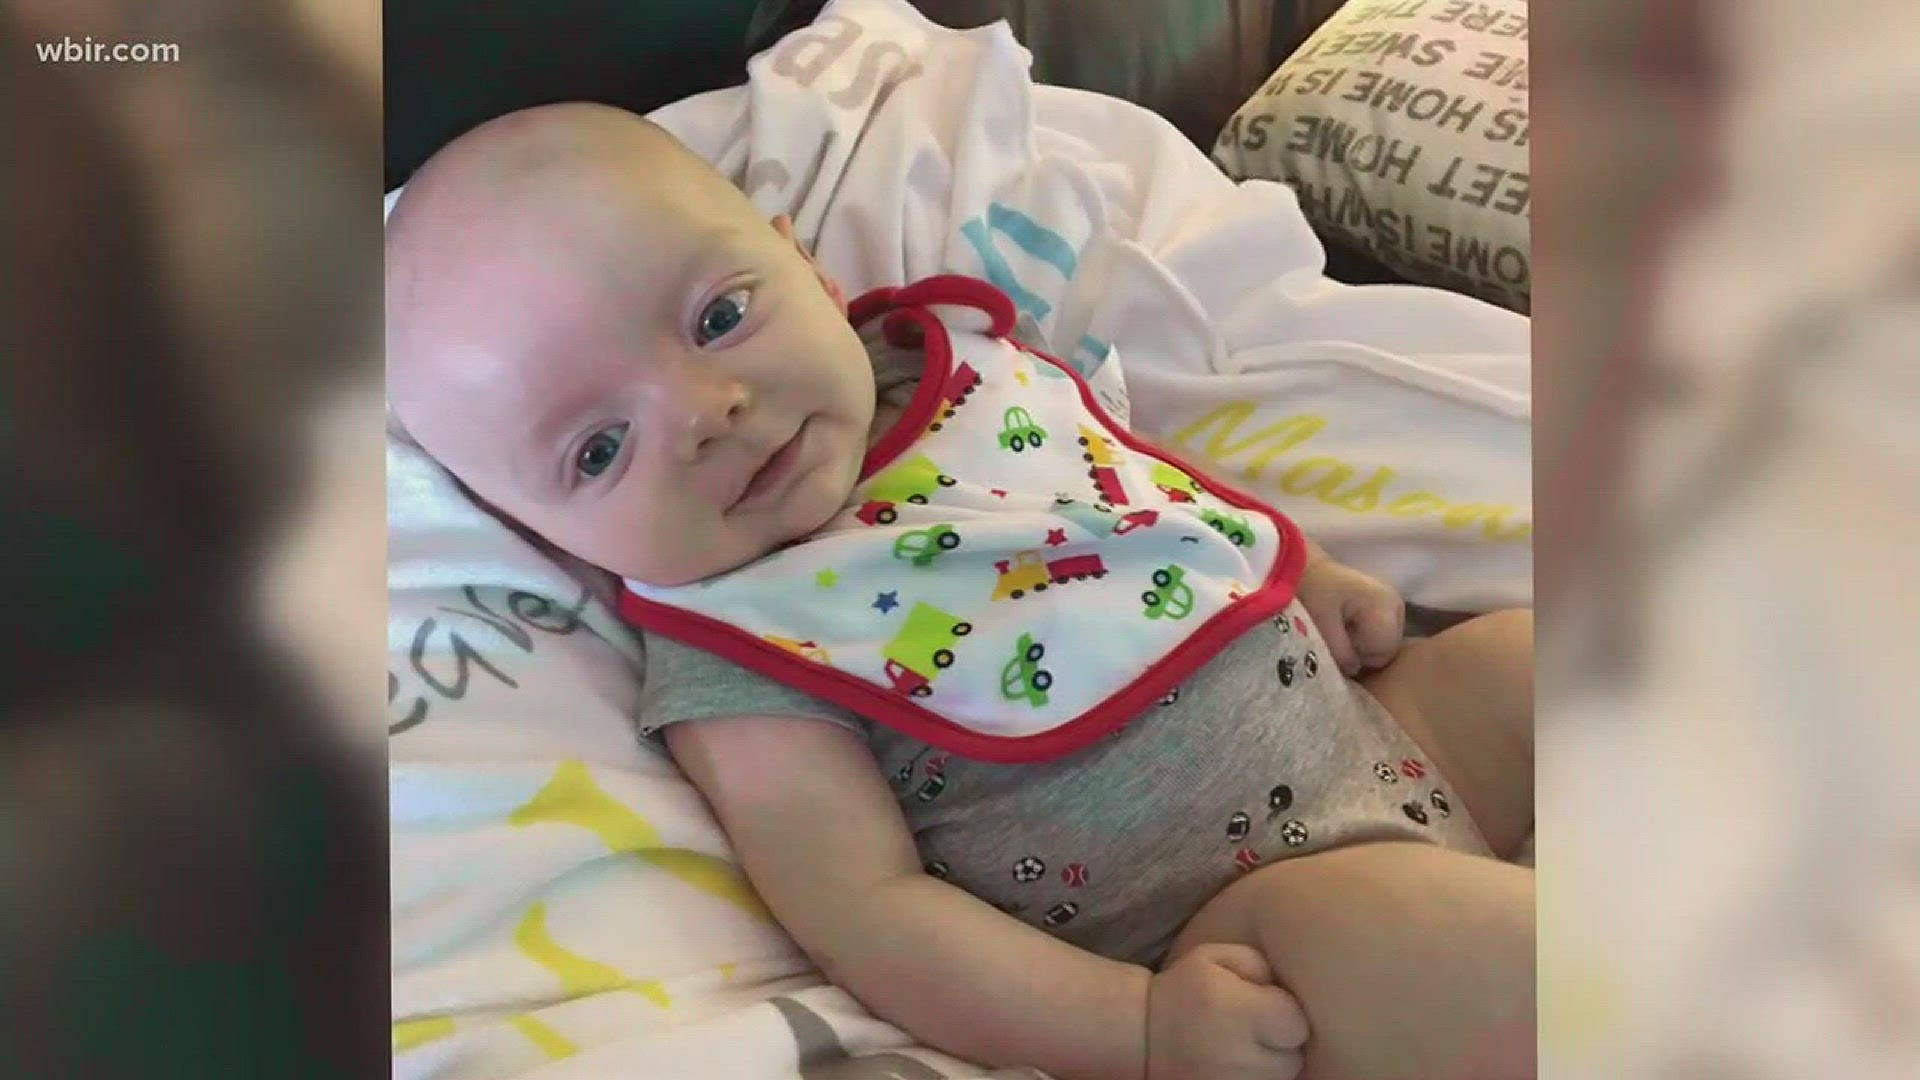 After Mason died of Sudden Infant Death Syndrome at just 4 months old, his parents established MAW's Cause to raise awareness for research into SIDS.